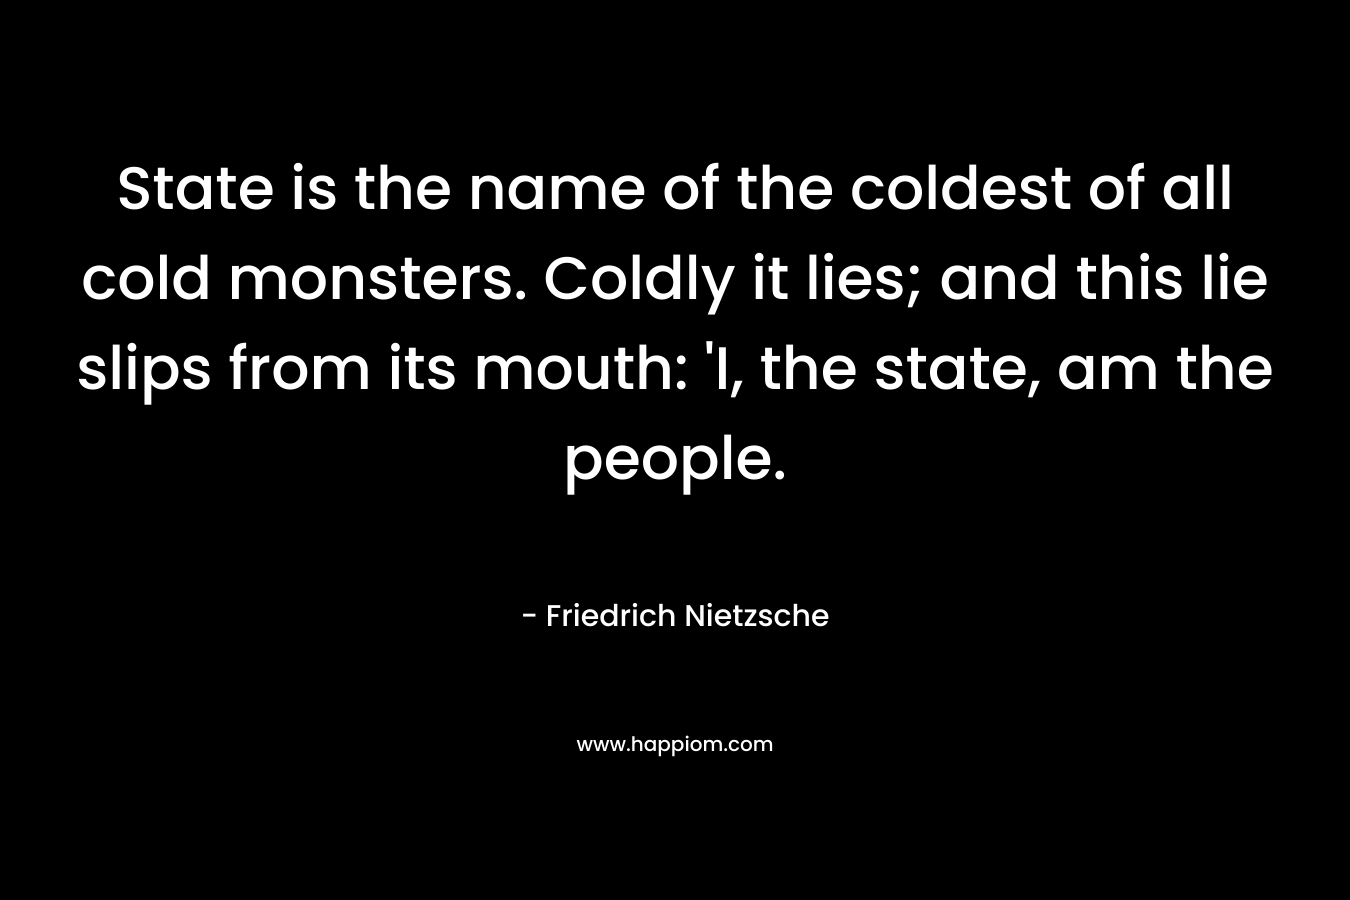 State is the name of the coldest of all cold monsters. Coldly it lies; and this lie slips from its mouth: 'I, the state, am the people.